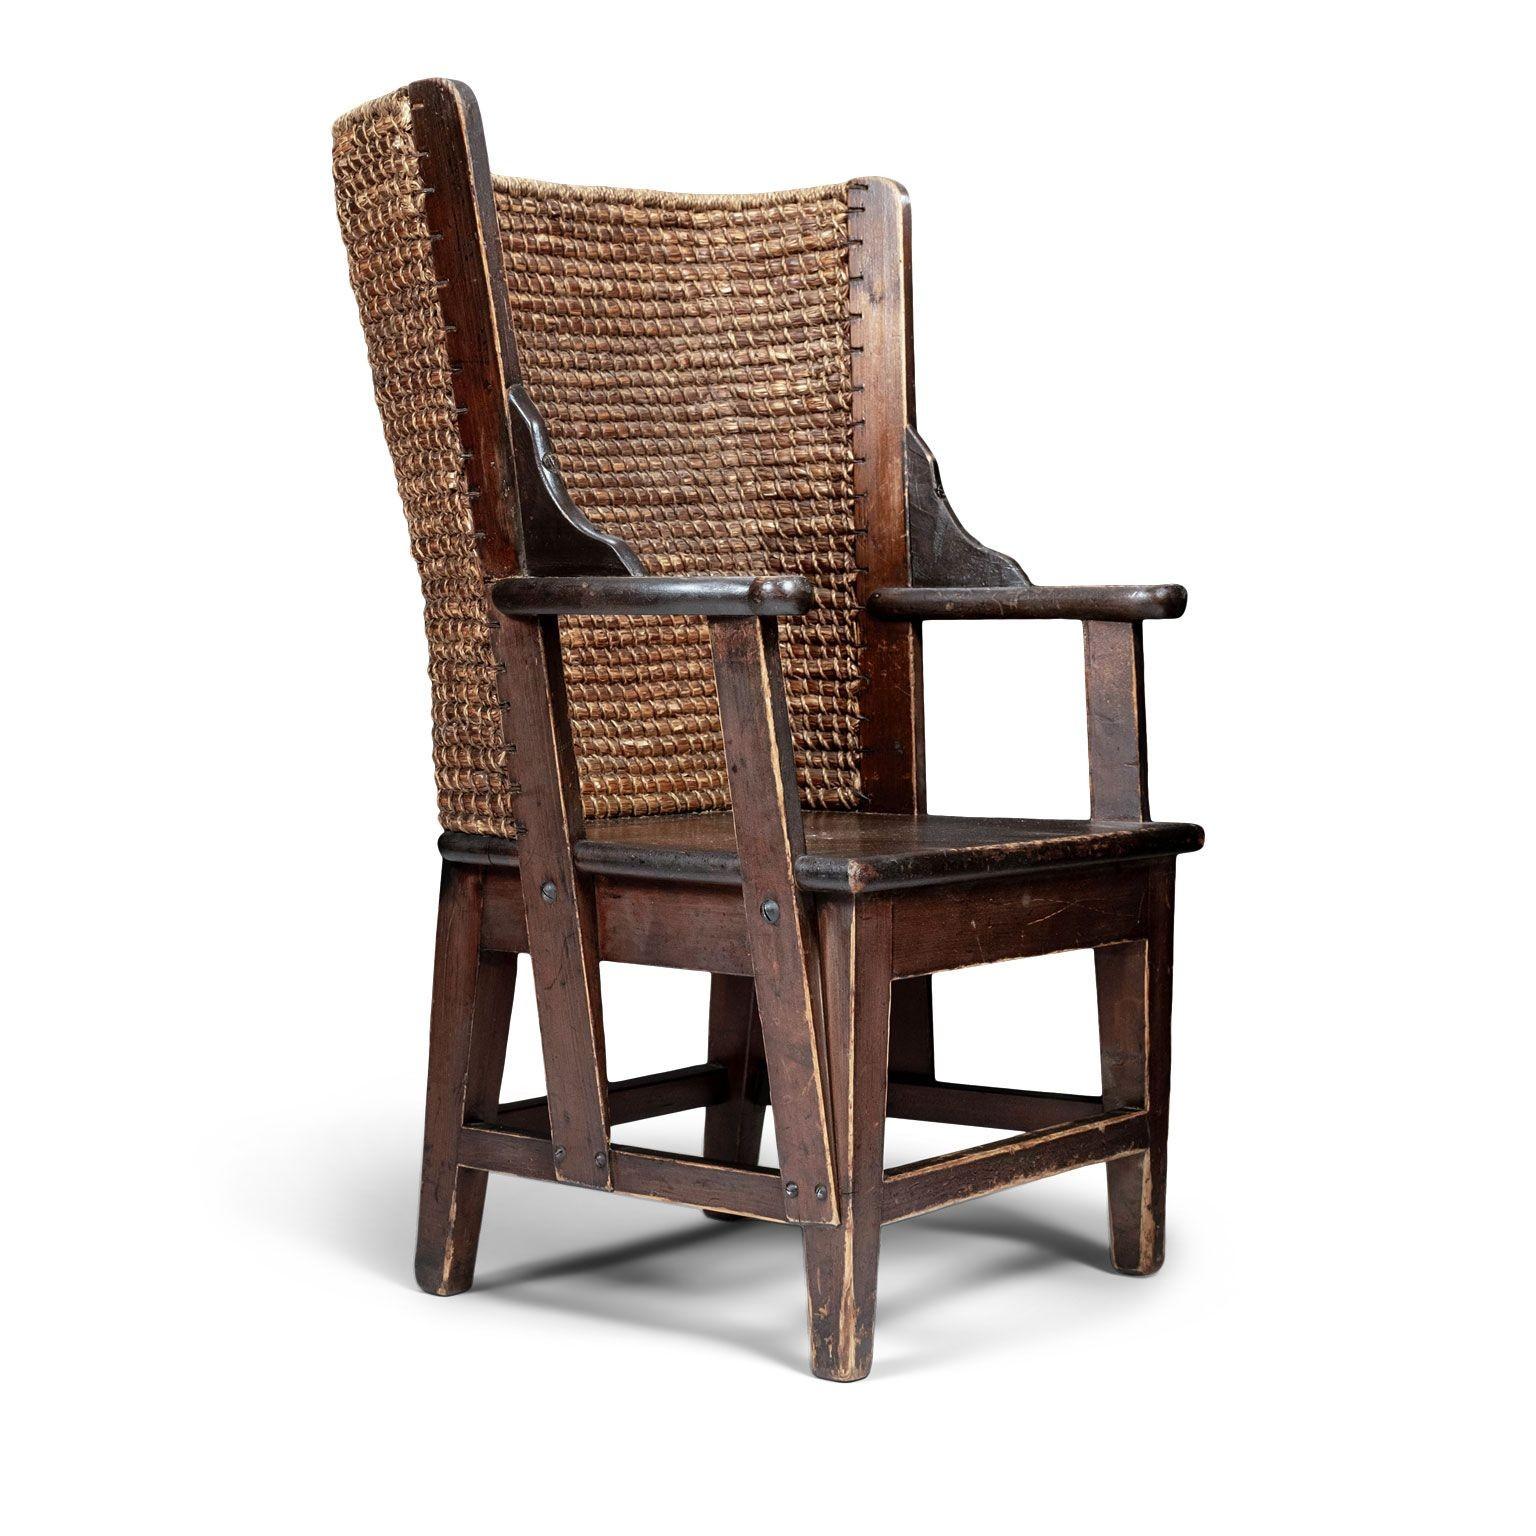 Petite jute and pine Scottish Orkney chair, dating to late 19th or early 20th century. Open arms, hand-woven jute back, solid seat and raised on tapered square supports joined by stretchers. Perfectly sized for fireside seating or a child.